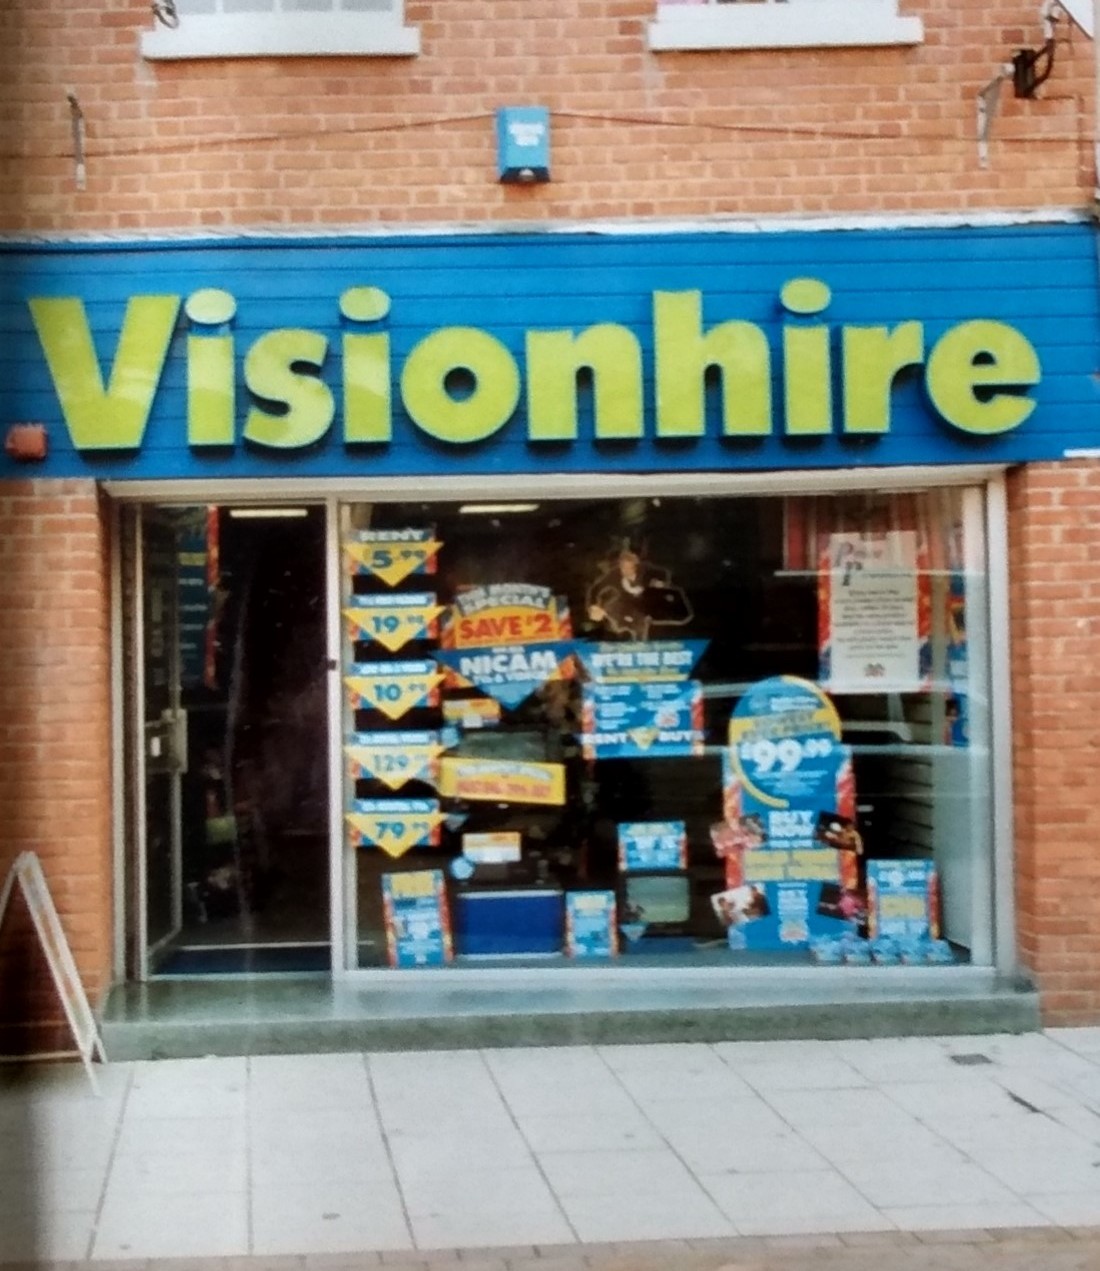 Visionhire was the place to rent TVs, video recorders and so forth